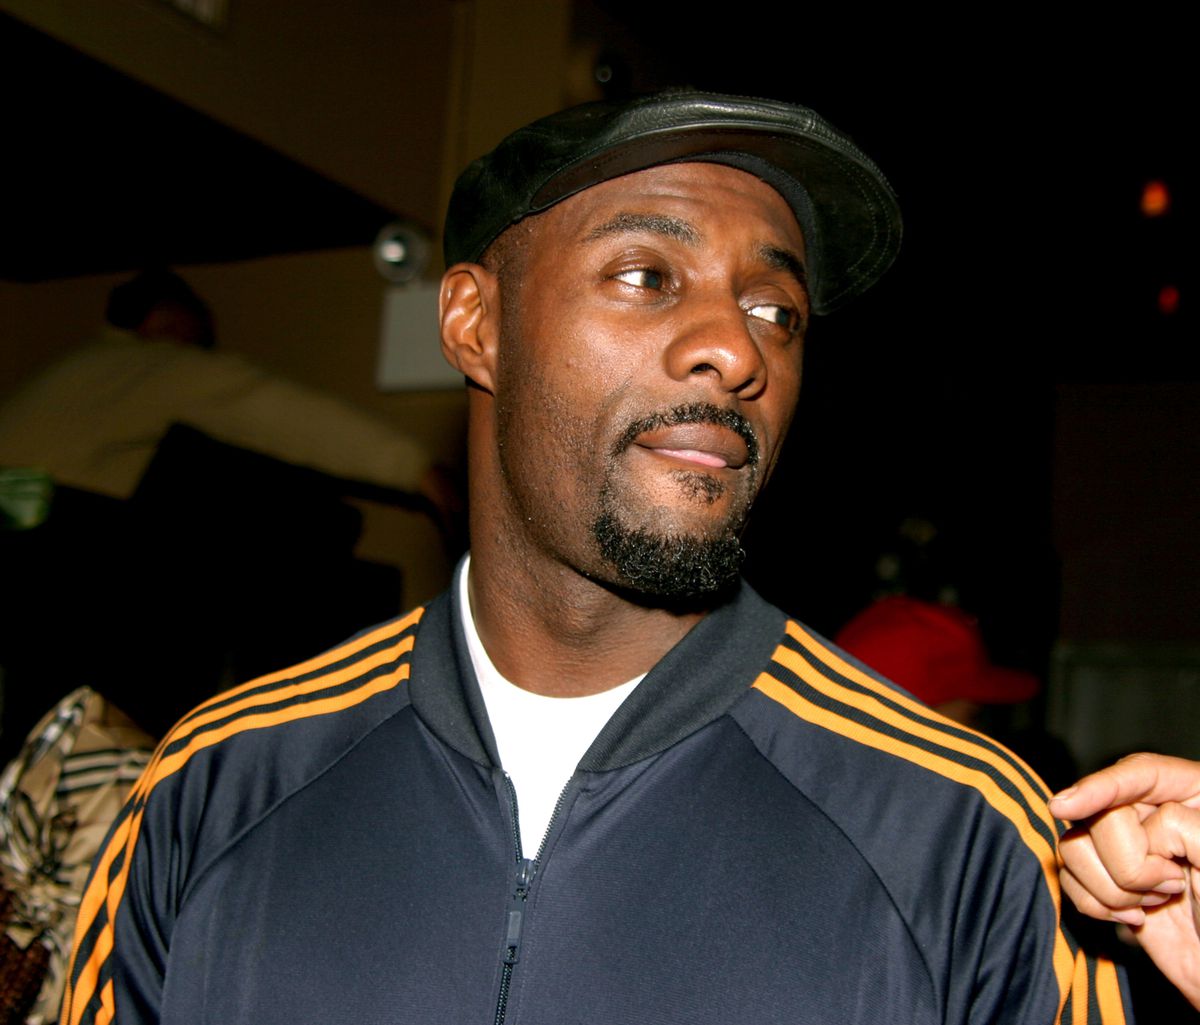 Idris Elba, Who Portrays Russell Stringer Bell on The Wire, Farewell Party